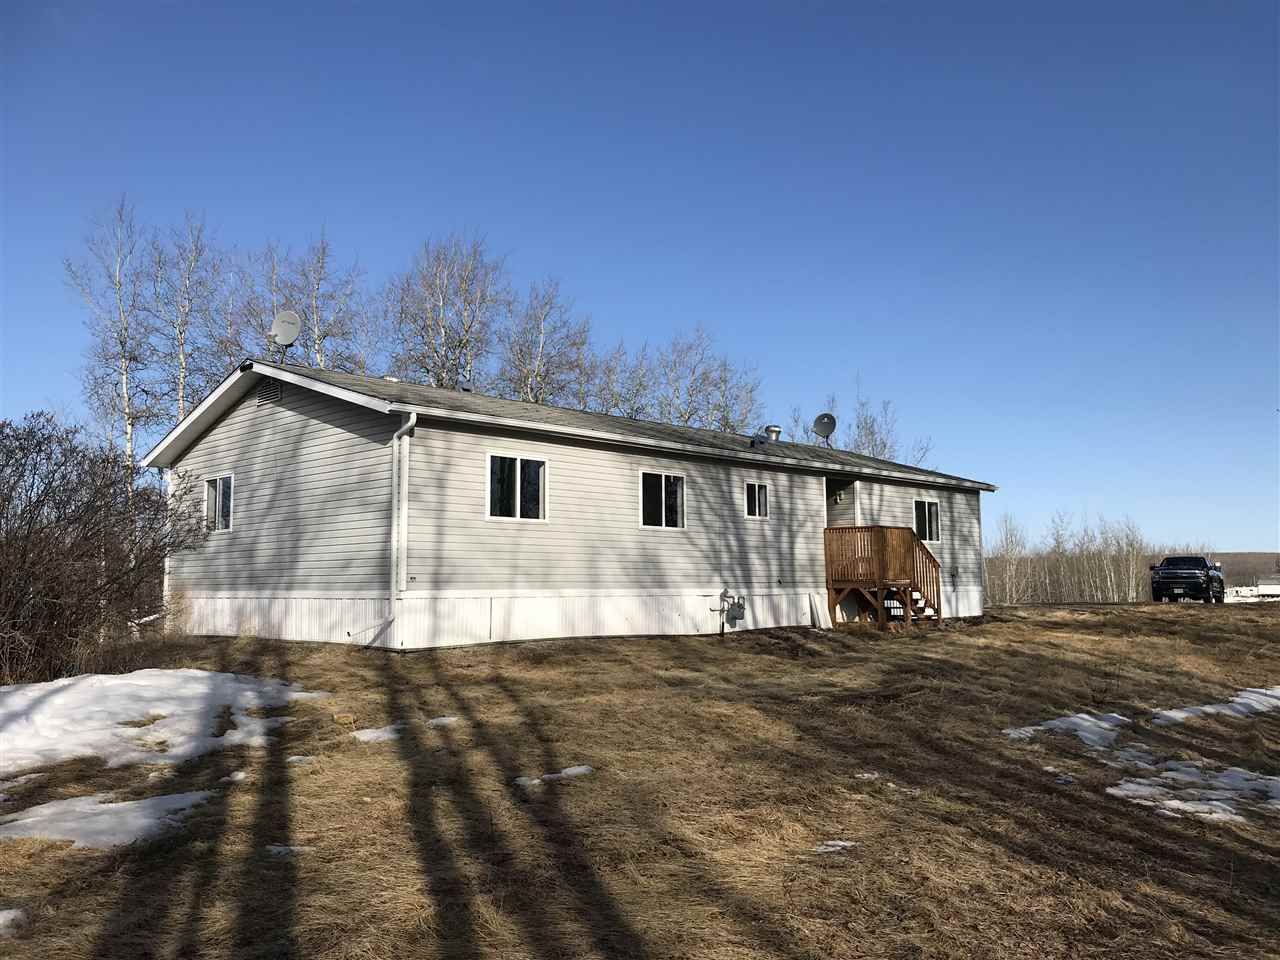 Main Photo: 5438 CECIL LAKE Road in Fort St. John: Fort St. John - Rural E 100th Manufactured Home for sale (Fort St. John (Zone 60))  : MLS®# R2353152